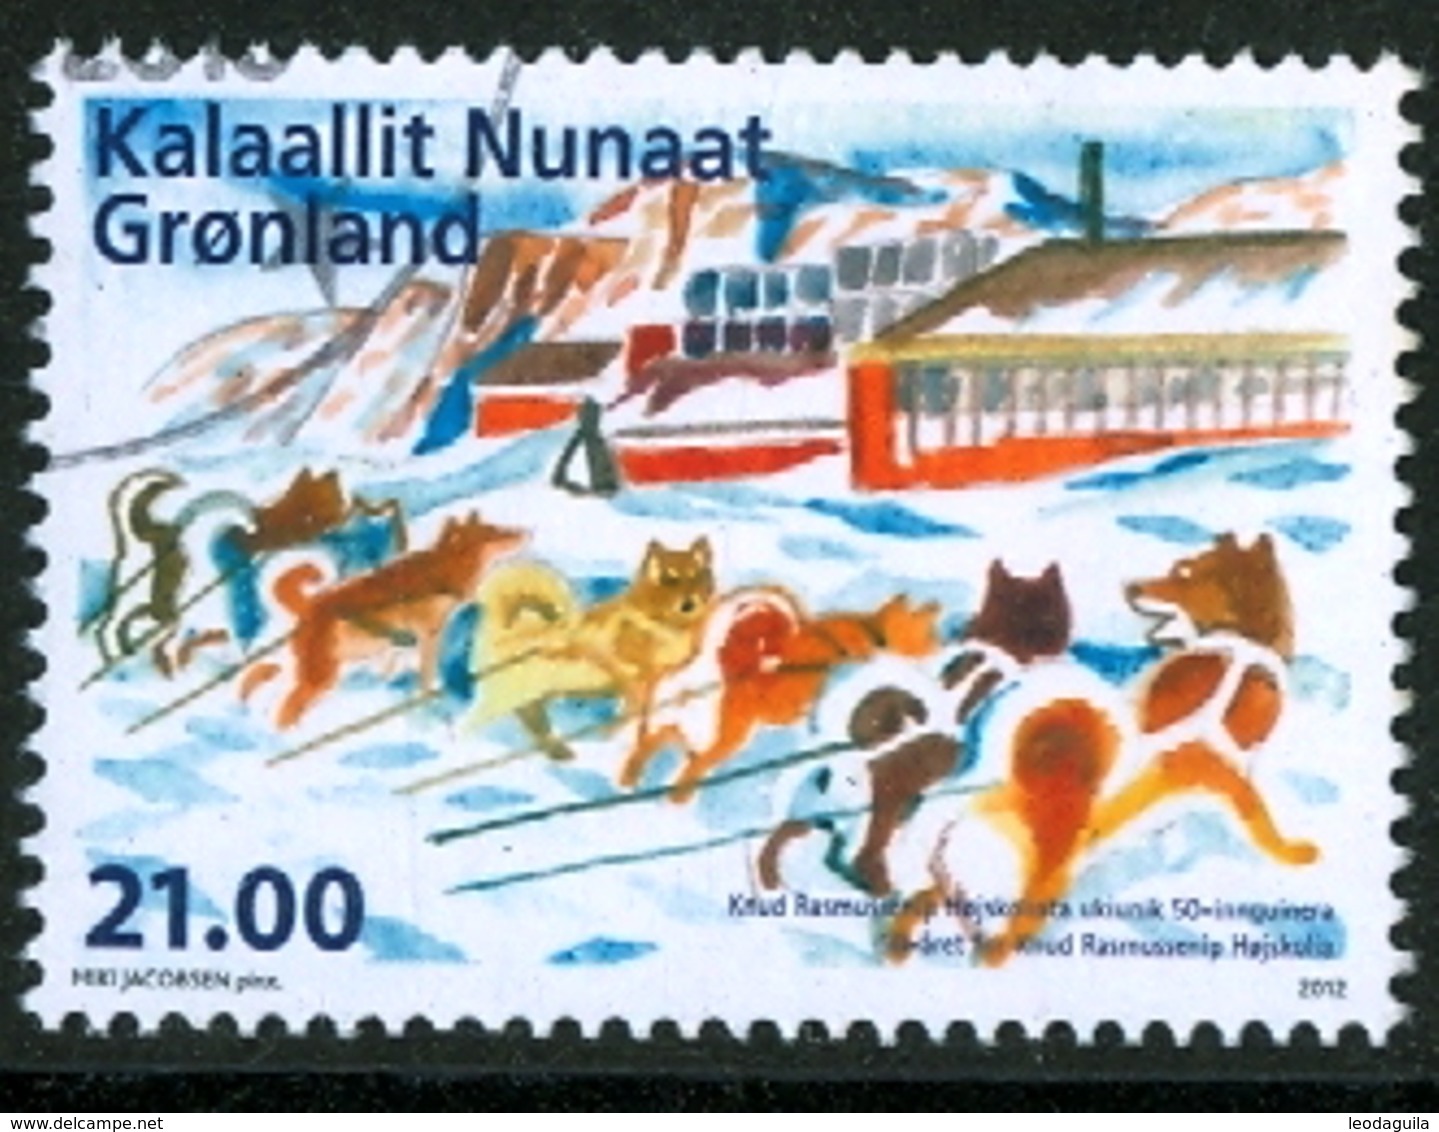 GREENLAND  #605 -  DOG - CHIEN  -  Knud Rasmussen School  - 2012  USED - Used Stamps